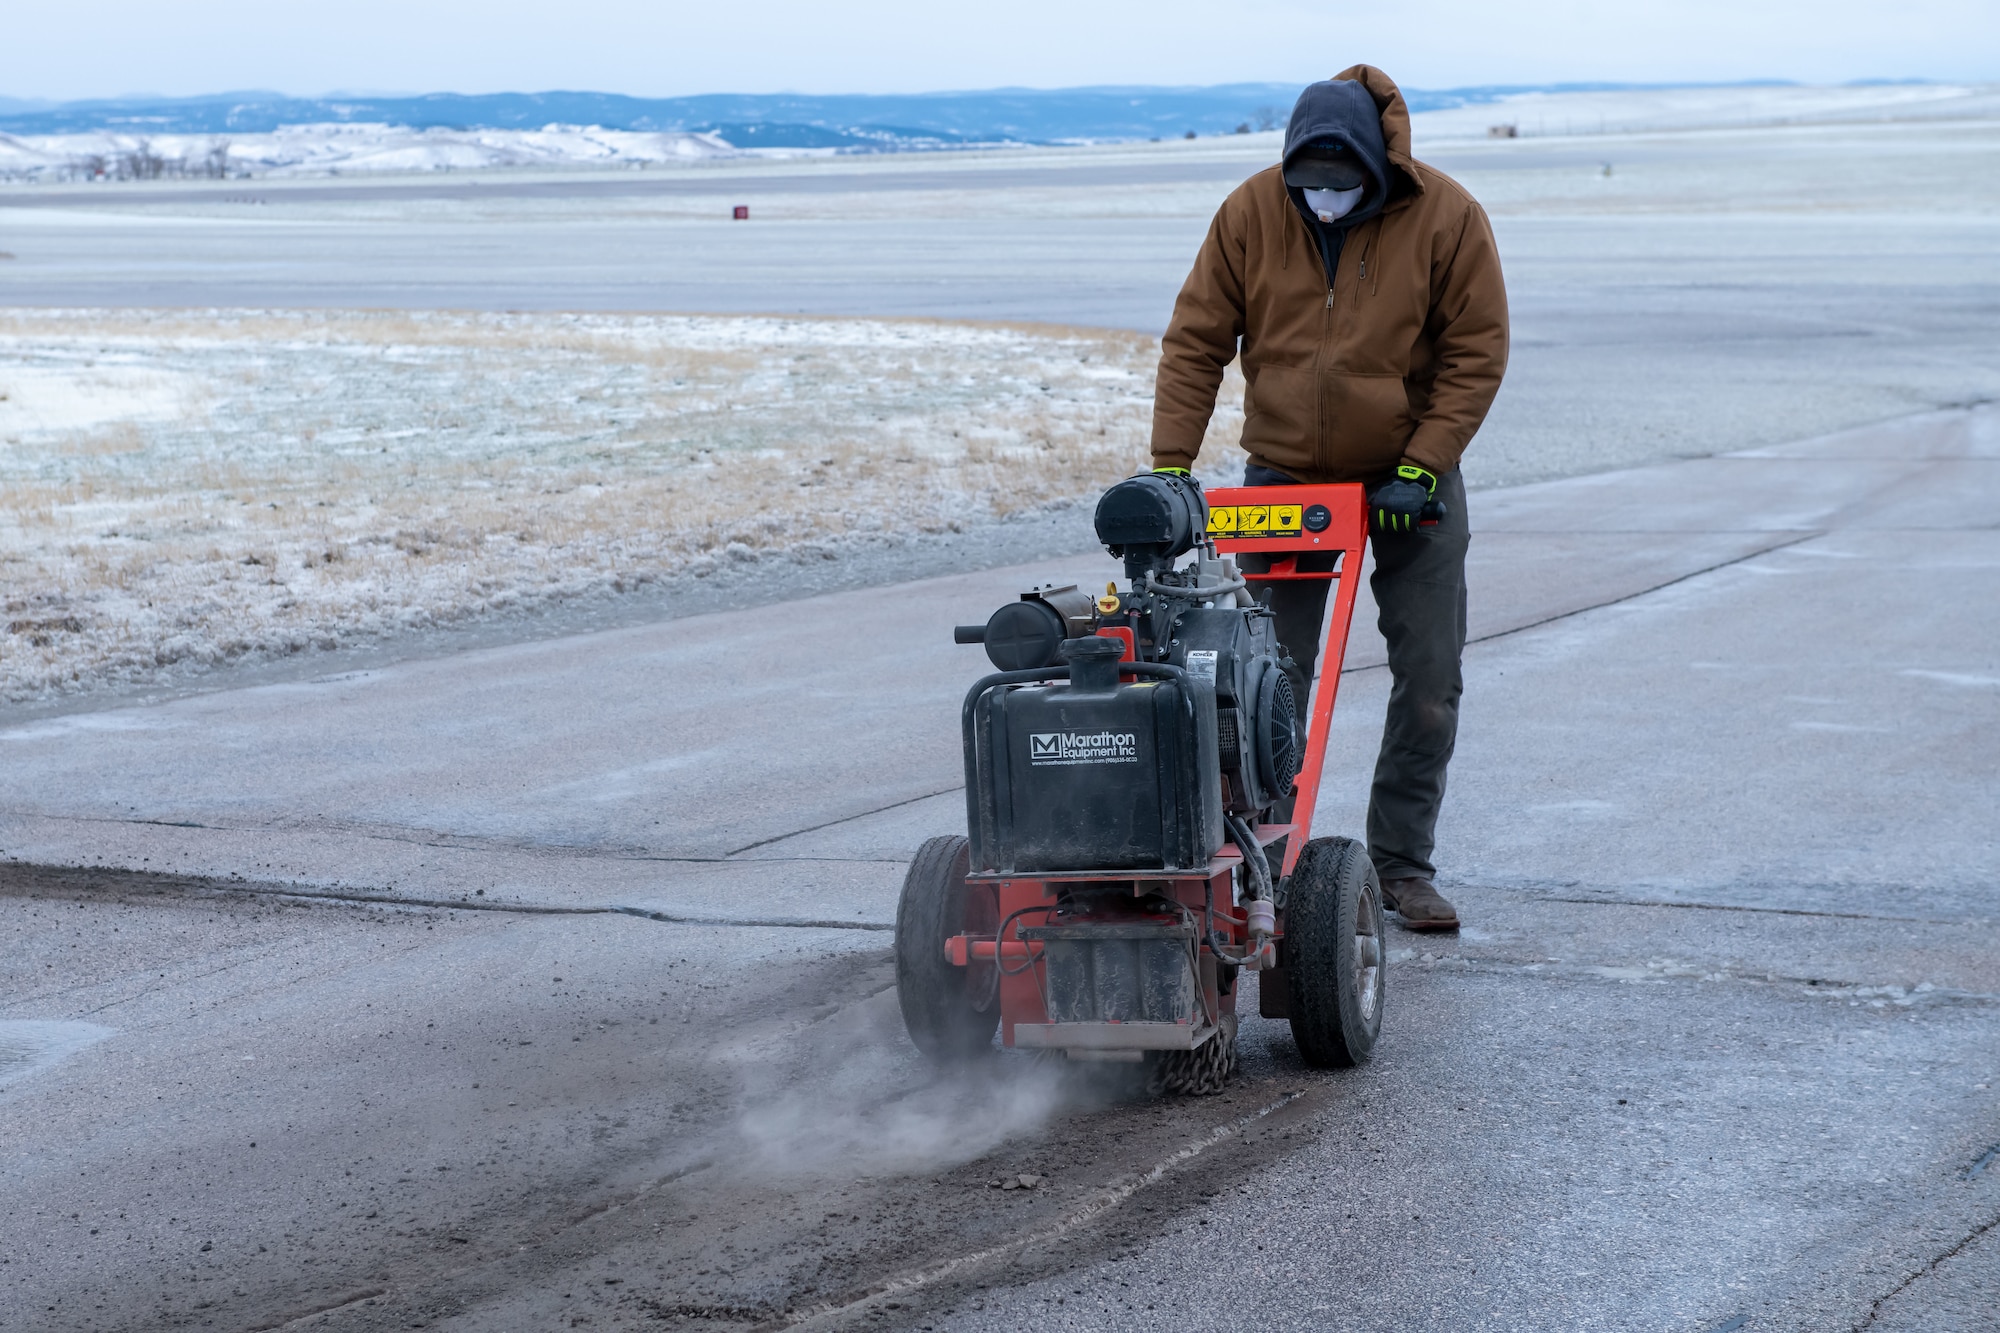 Taylor Bowling, 28th Civil Engineering Squadron heavy equipment operator and pavement repair specialist, uses an asphalt saw to enlarge a crack in the flight line on Ellsworth Air Force Base, S.D., April 24, 2022. In order for certain cracks to be repaired, they must first be enlarged before the appropriate sealant can be used to fill in the crack. (U.S. Air Force photo by Airman 1st Class Adam Olson)